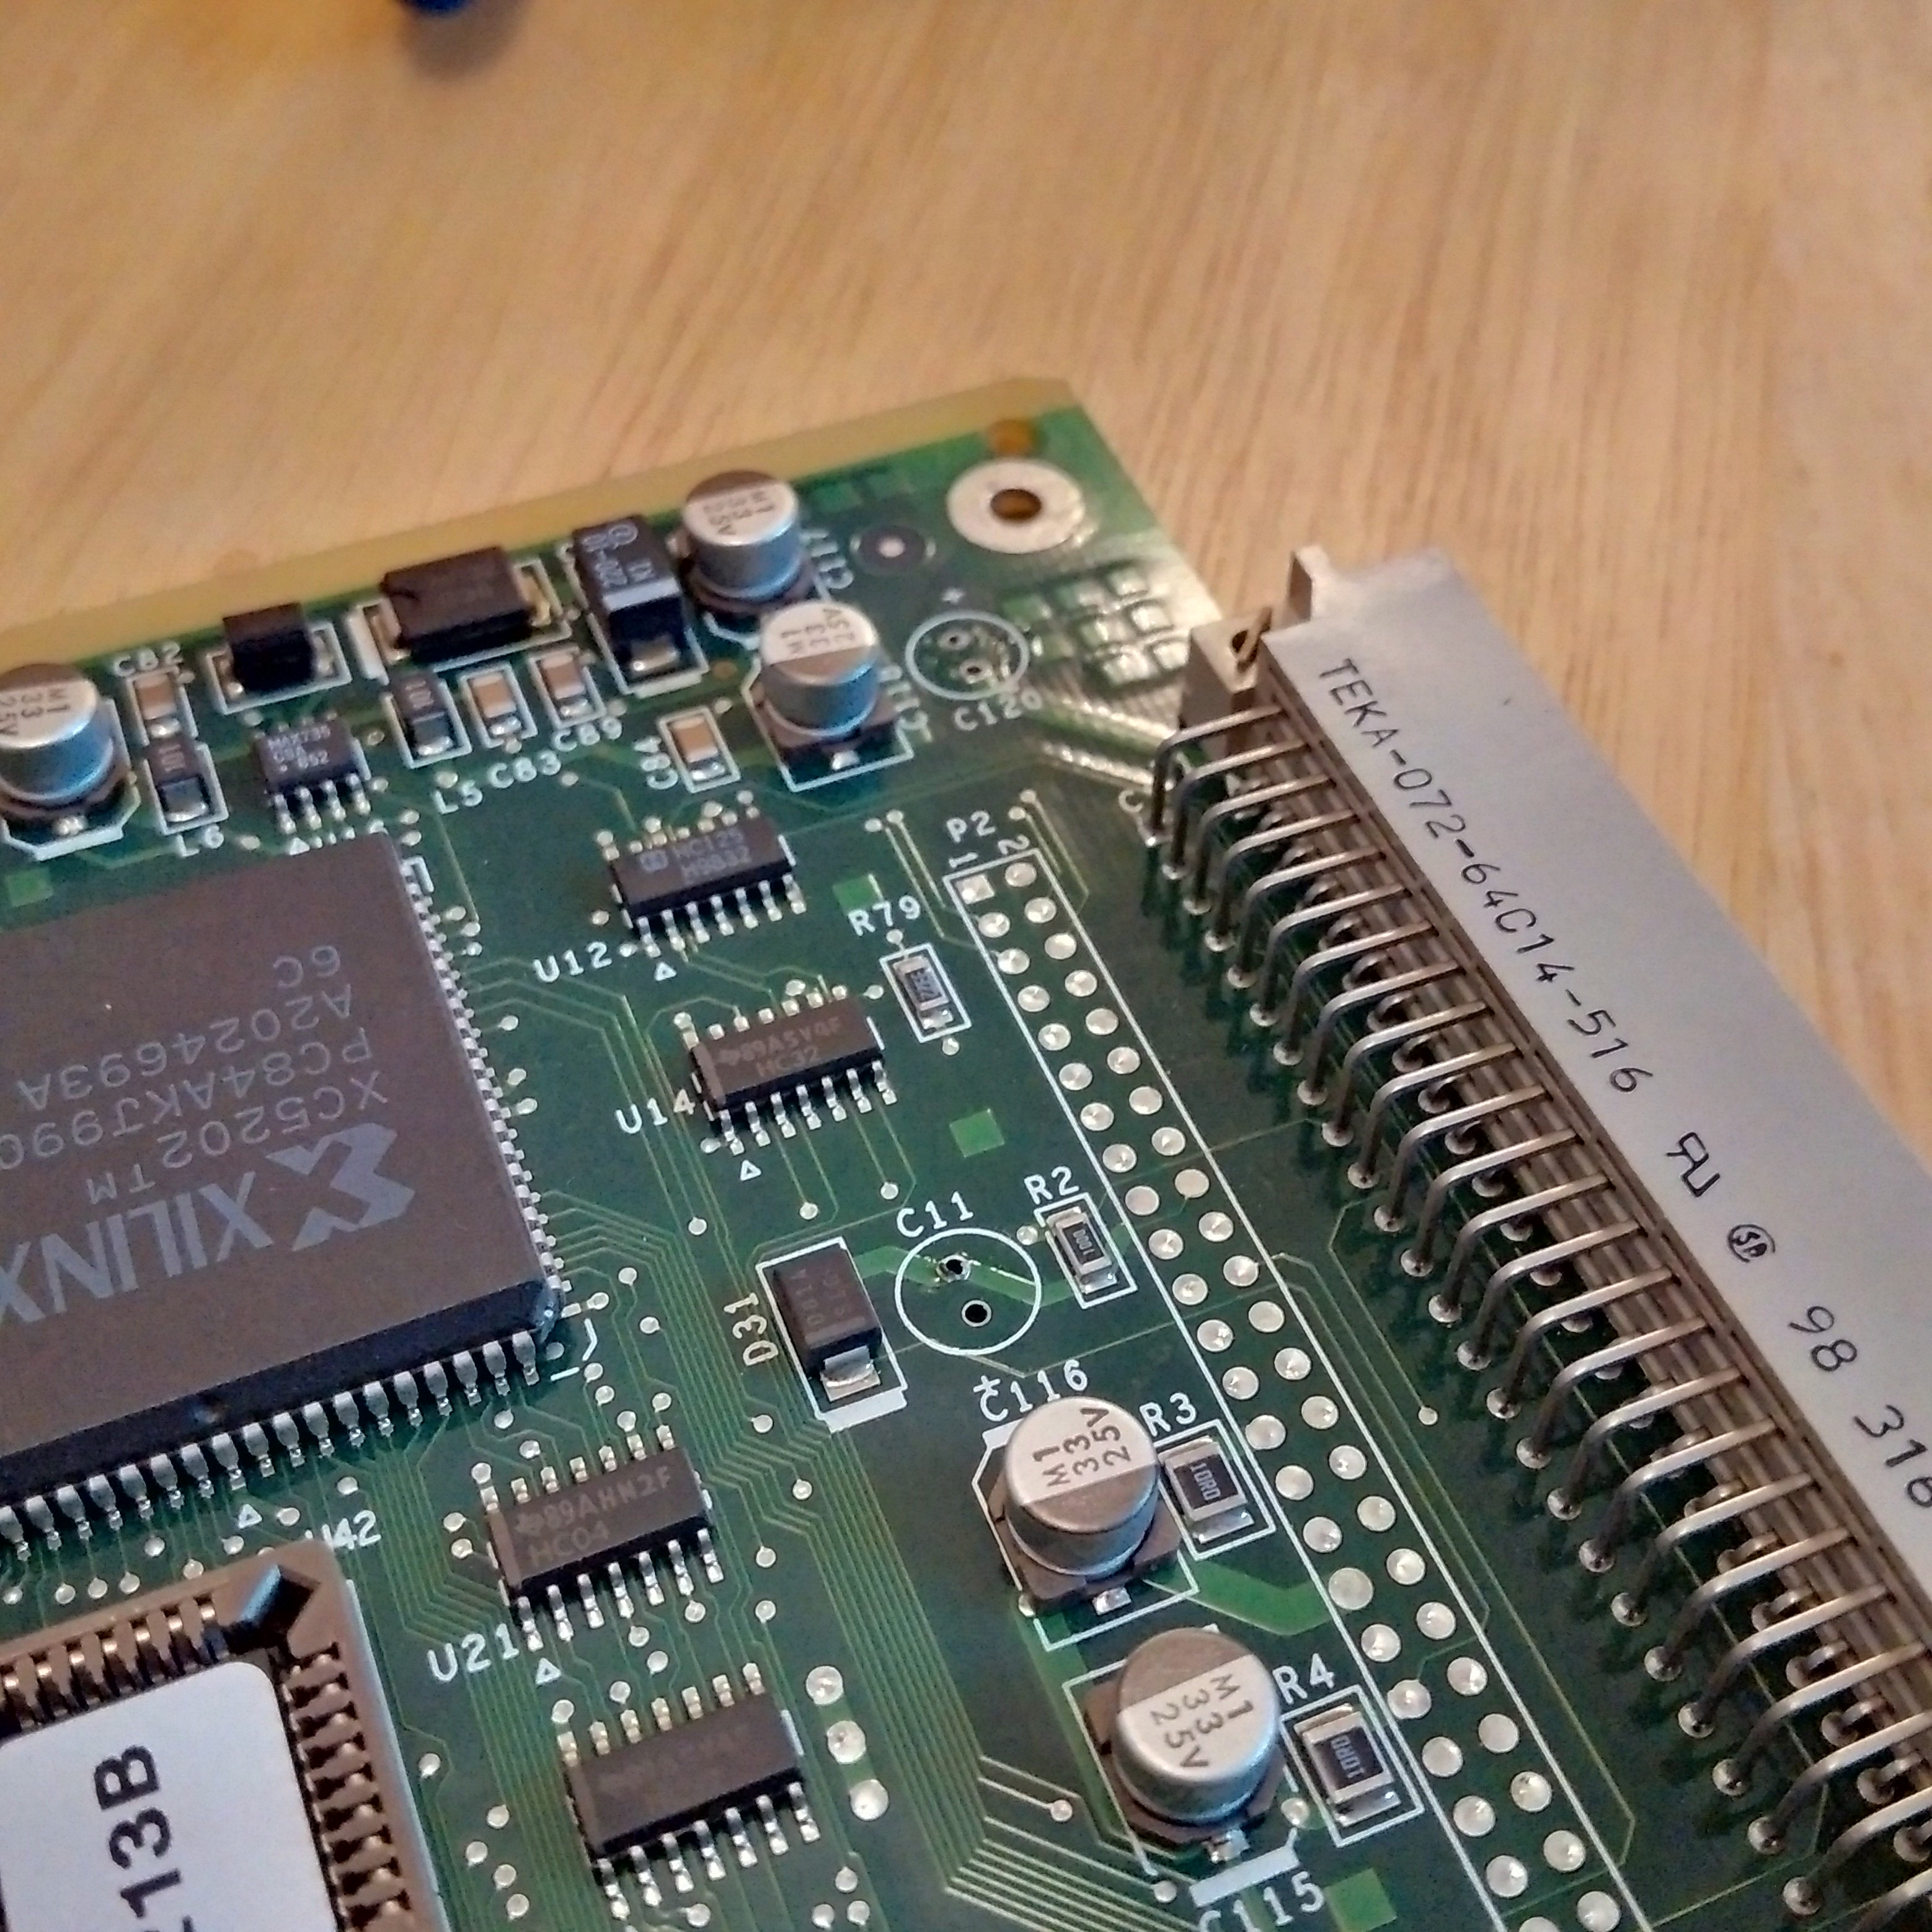 Close up of the board with the capacitors removed